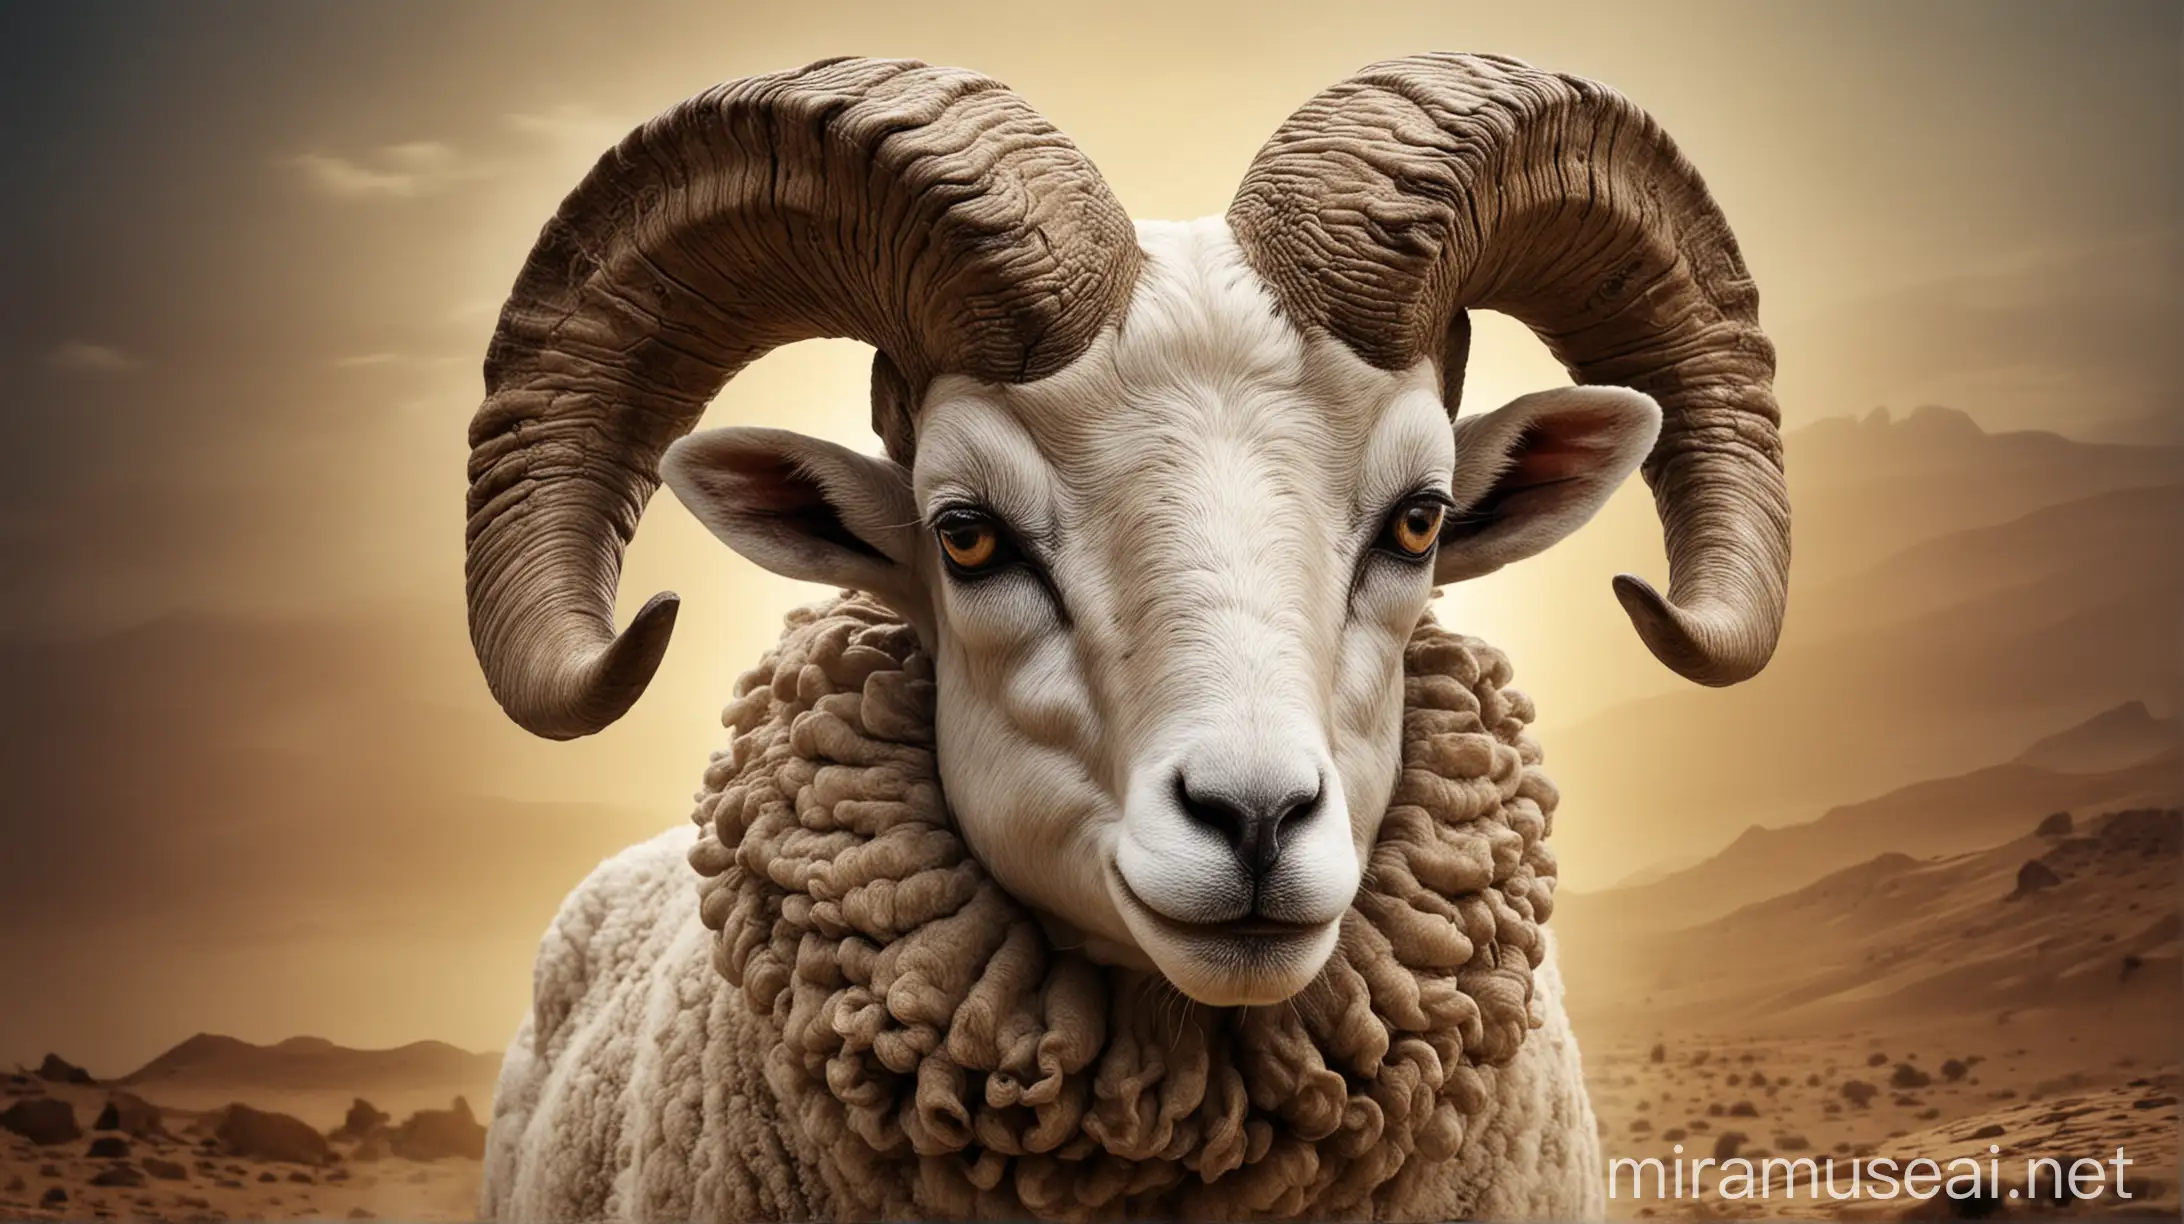 The Ram Sent by Allah

Description: As Ibrahim (Alayhi Salaam) attempts to sacrifice Ismail, Allah sends a ram to be sacrificed instead. The ram stands ready, and Ismail is safe.